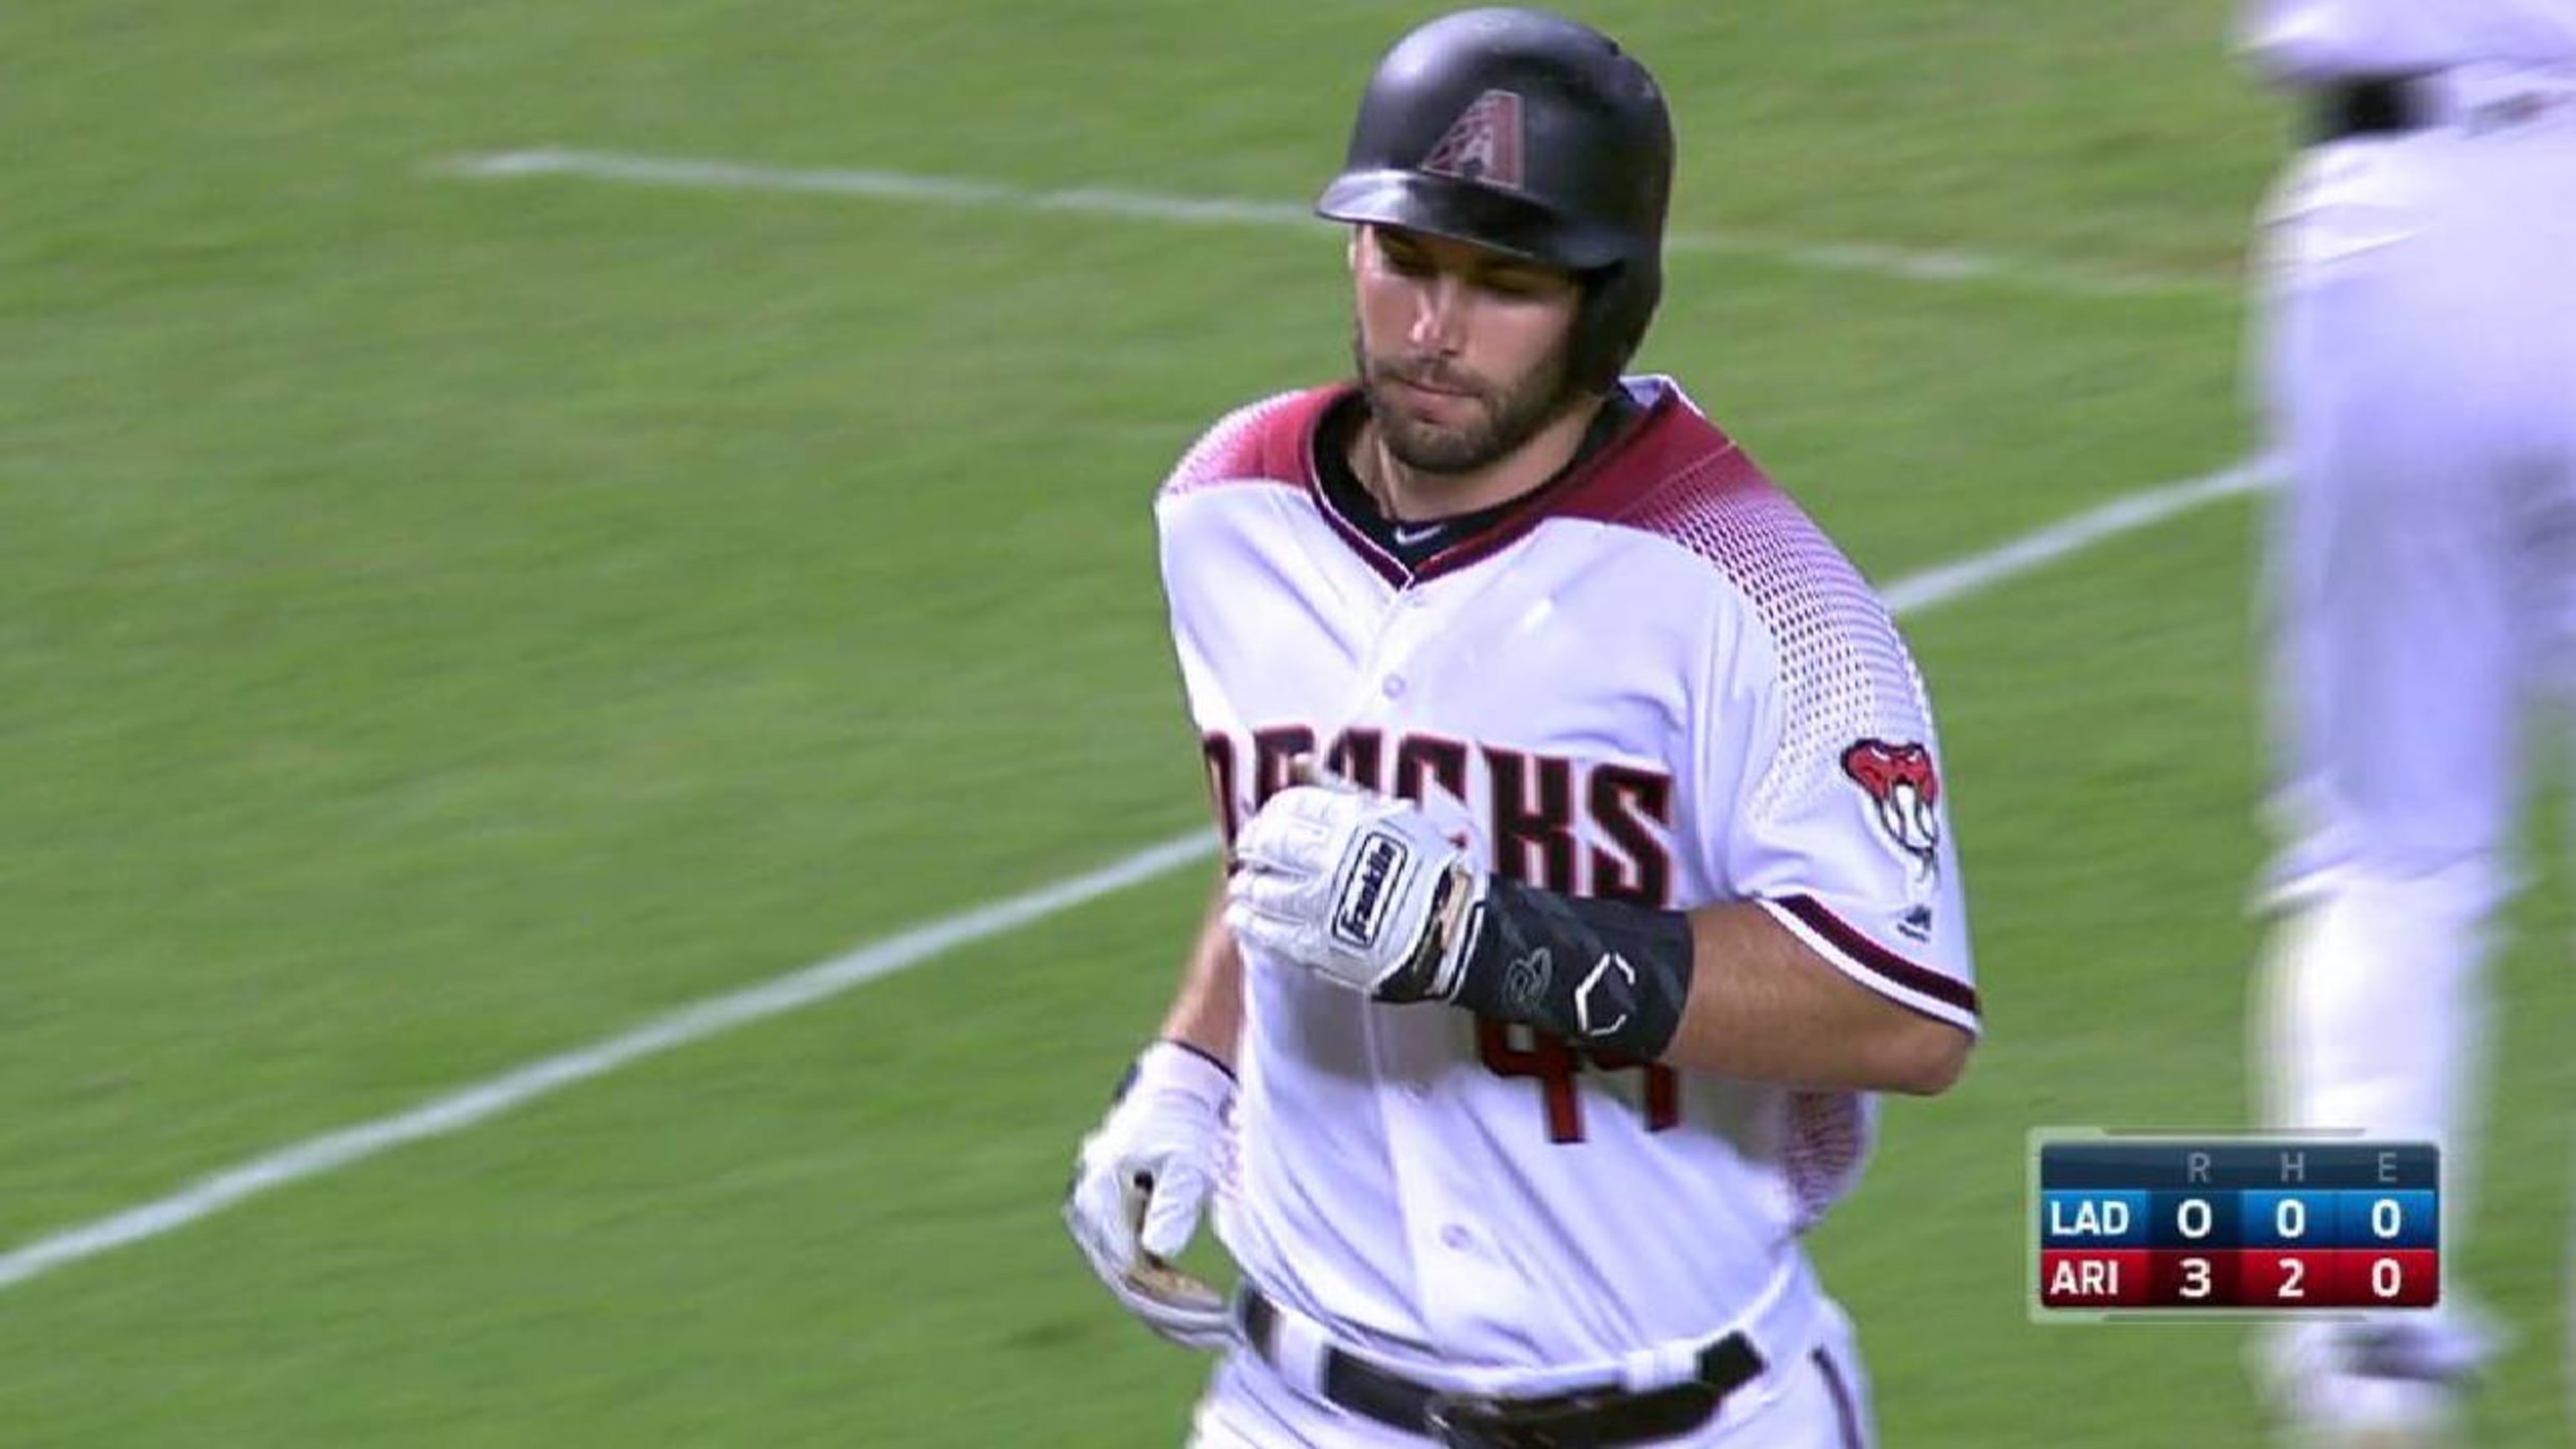 J.D. Martinez has quickly become part of D-backs family, Lovullo says